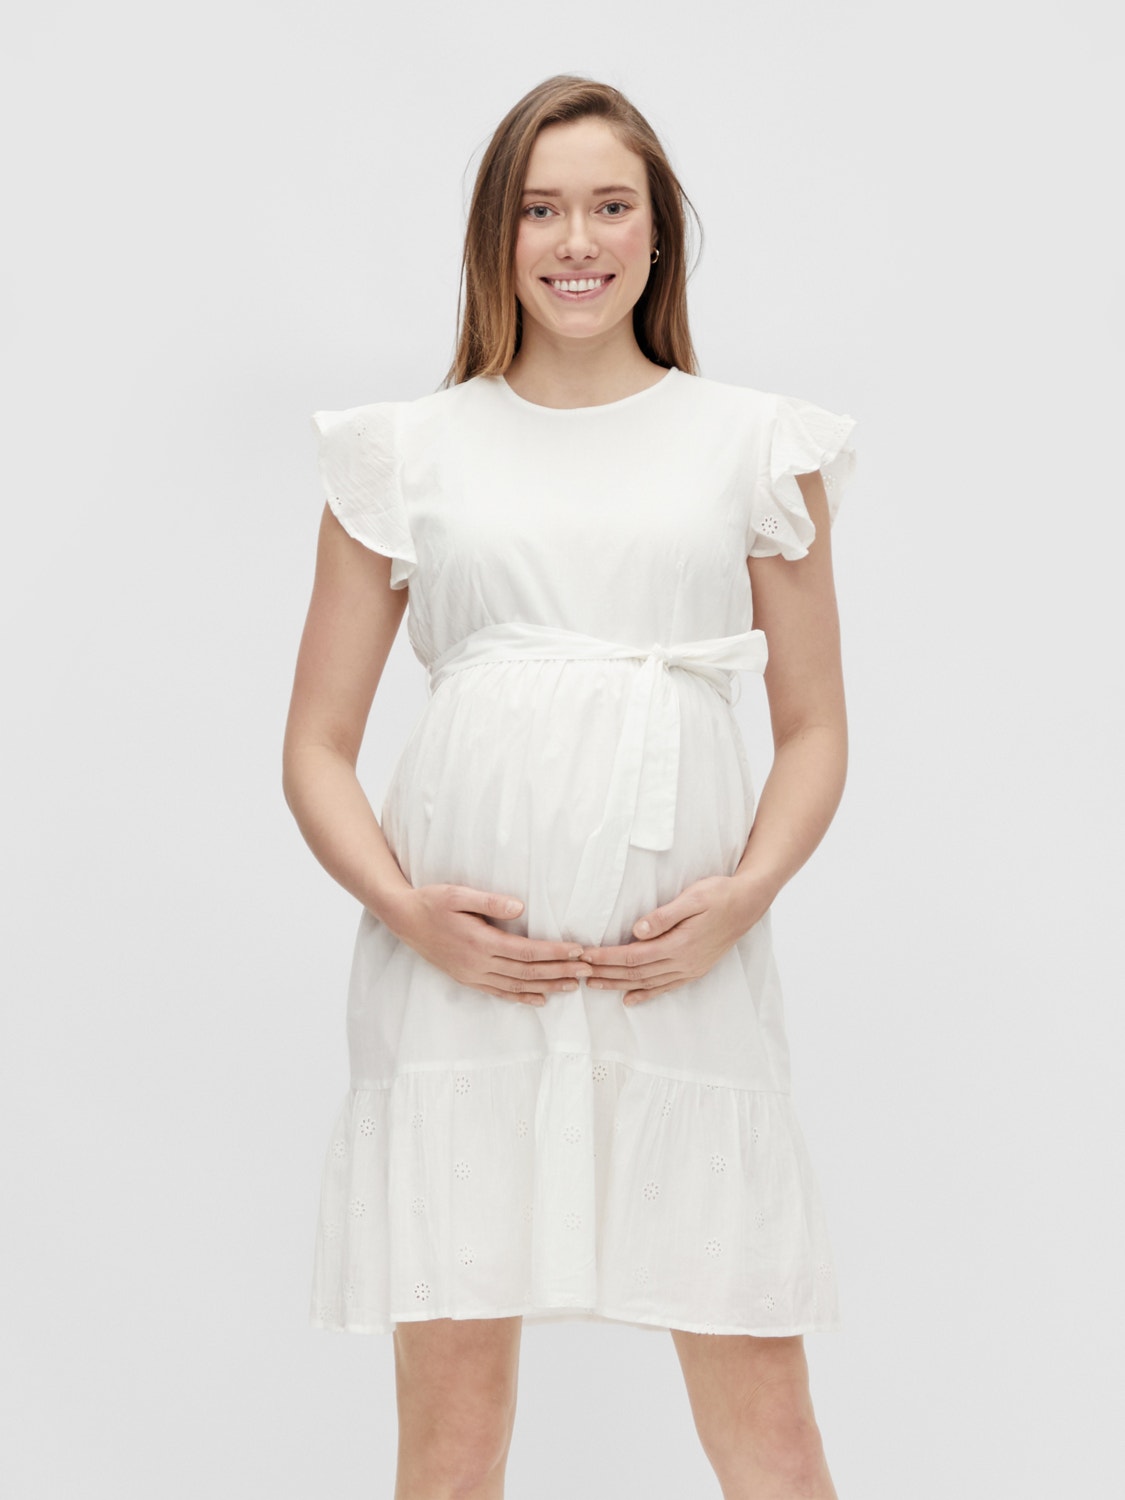 MAMALICIOUS Women's Maternity Dress, Snow White, XL : Buy Online at Best  Price in KSA - Souq is now : Fashion